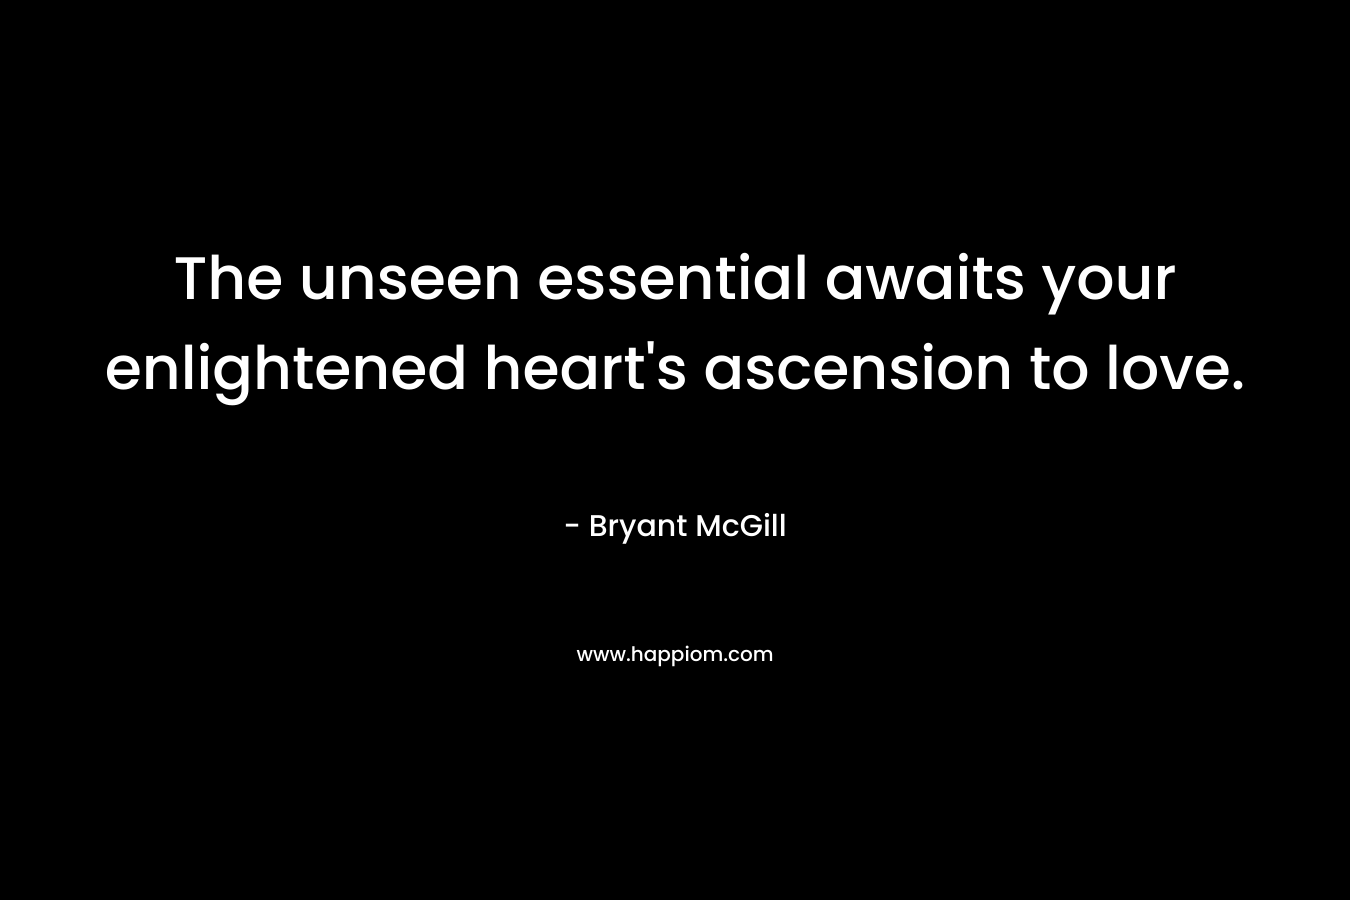 The unseen essential awaits your enlightened heart’s ascension to love. – Bryant McGill